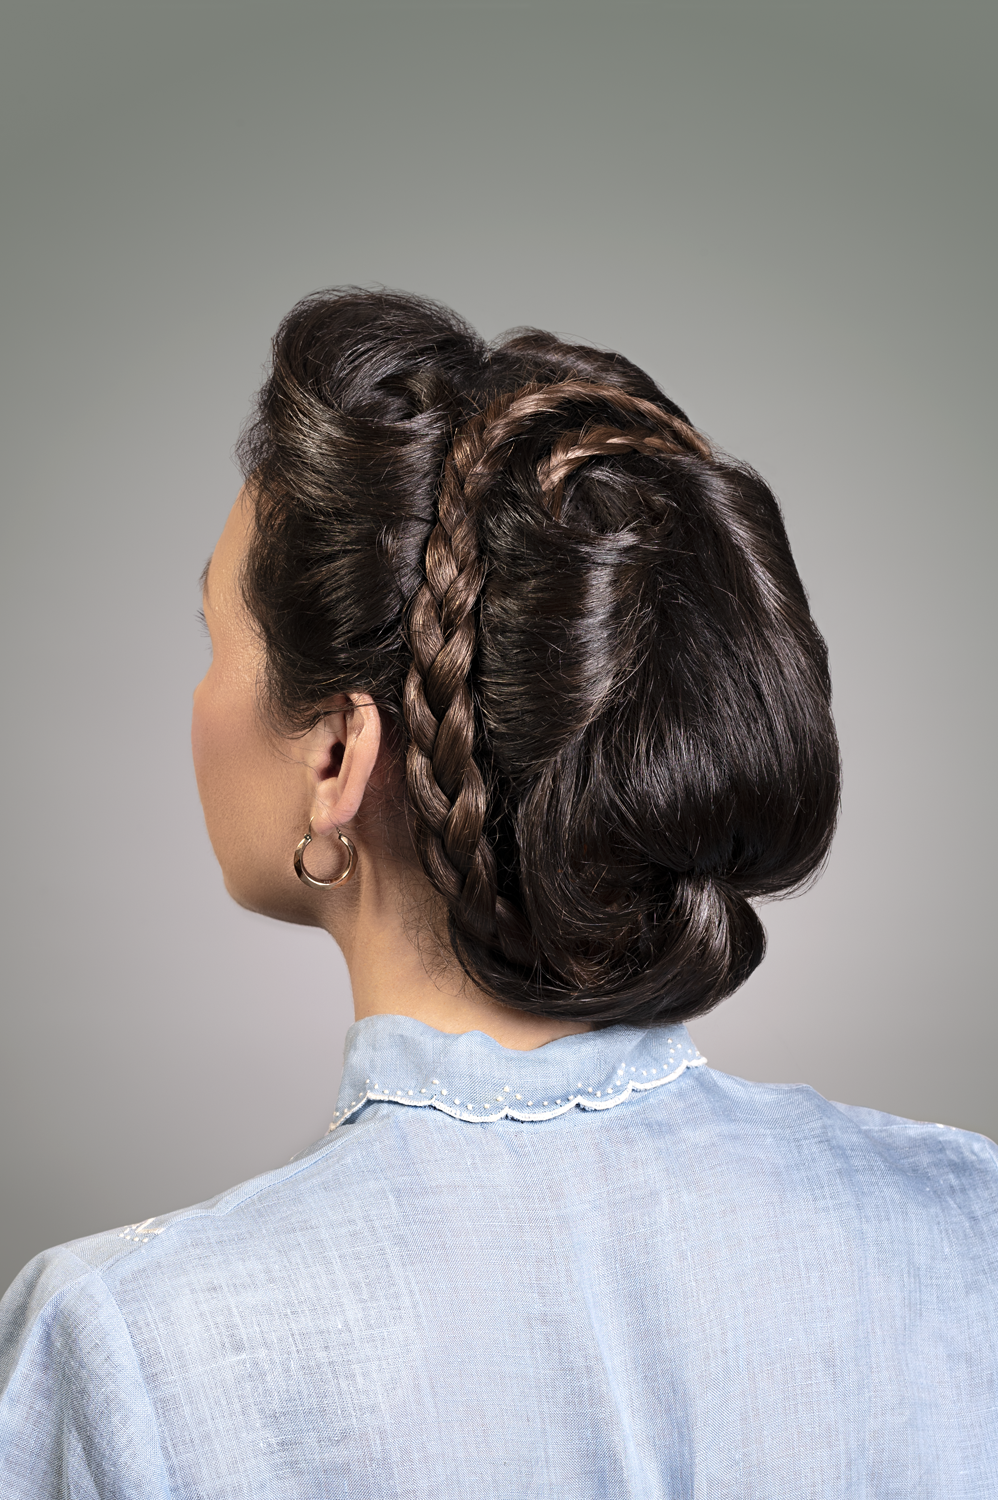 Feminine portrait photographed from behind with 1940s German Braid and high neck blue shirt. 